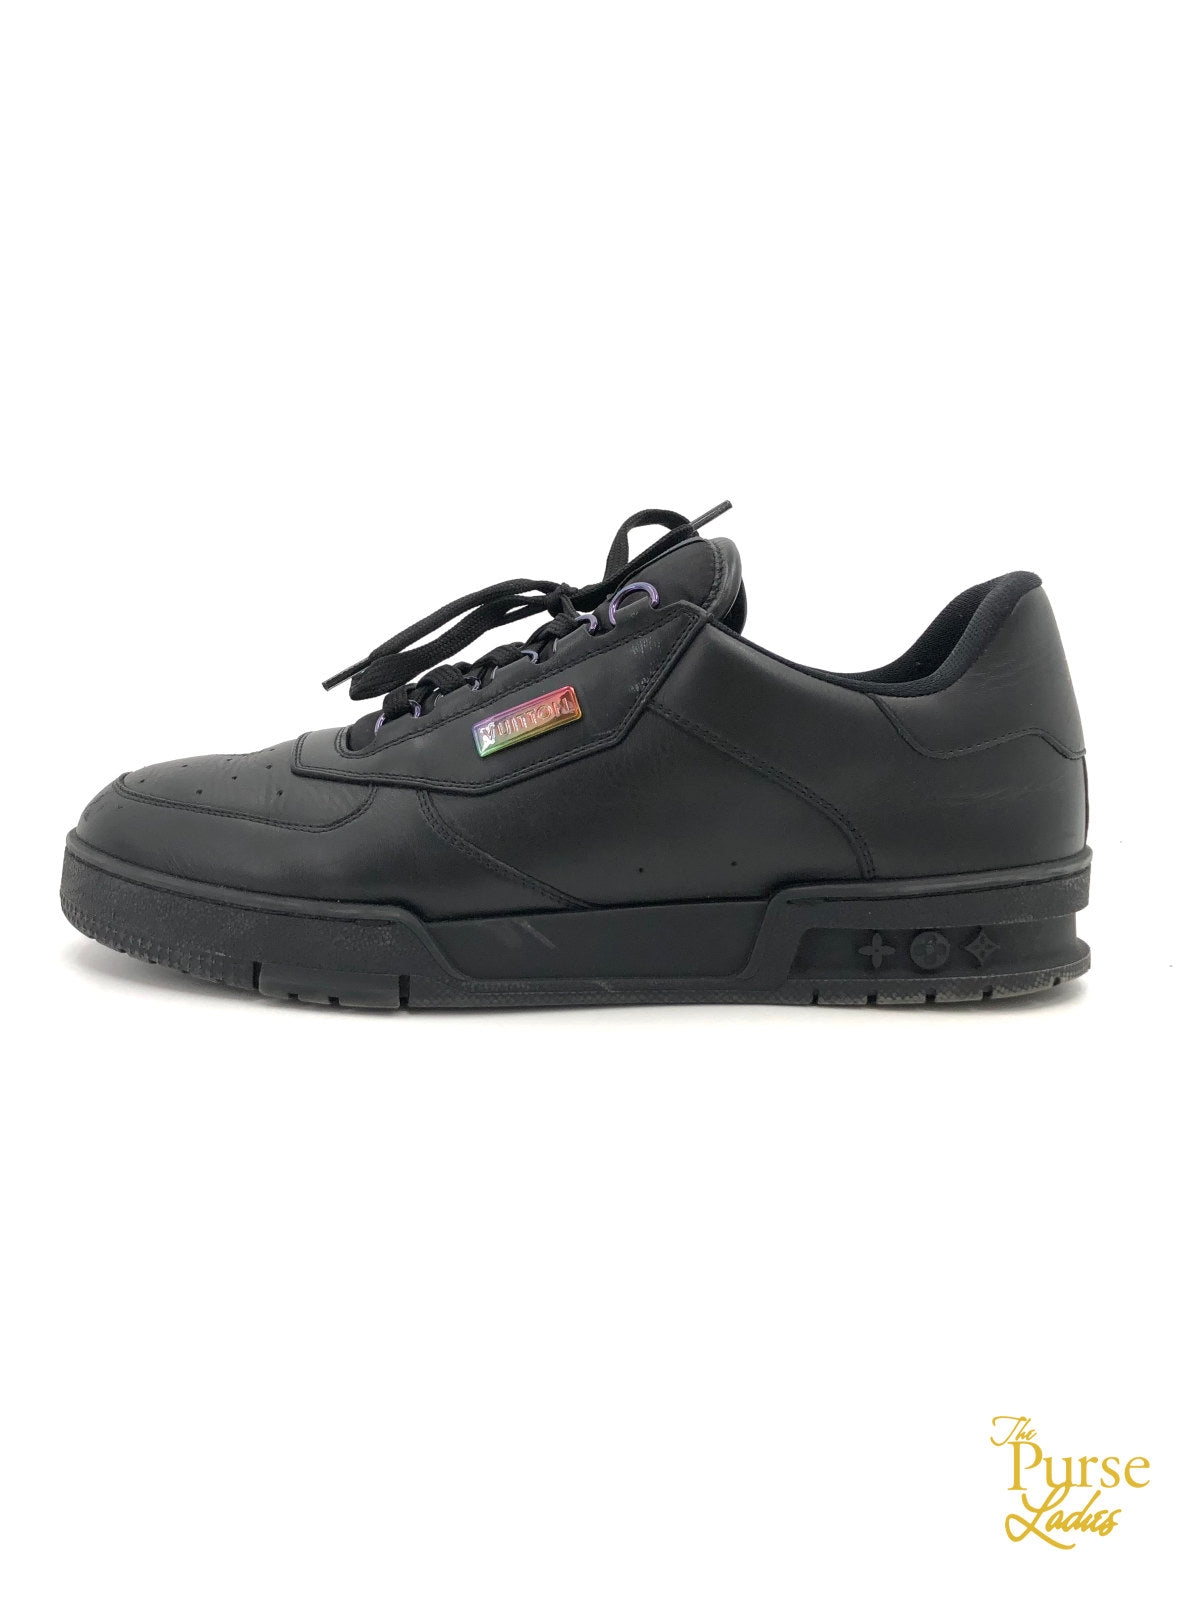 Leather trainers Louis Vuitton Black size 36 EU in Leather - 31813509